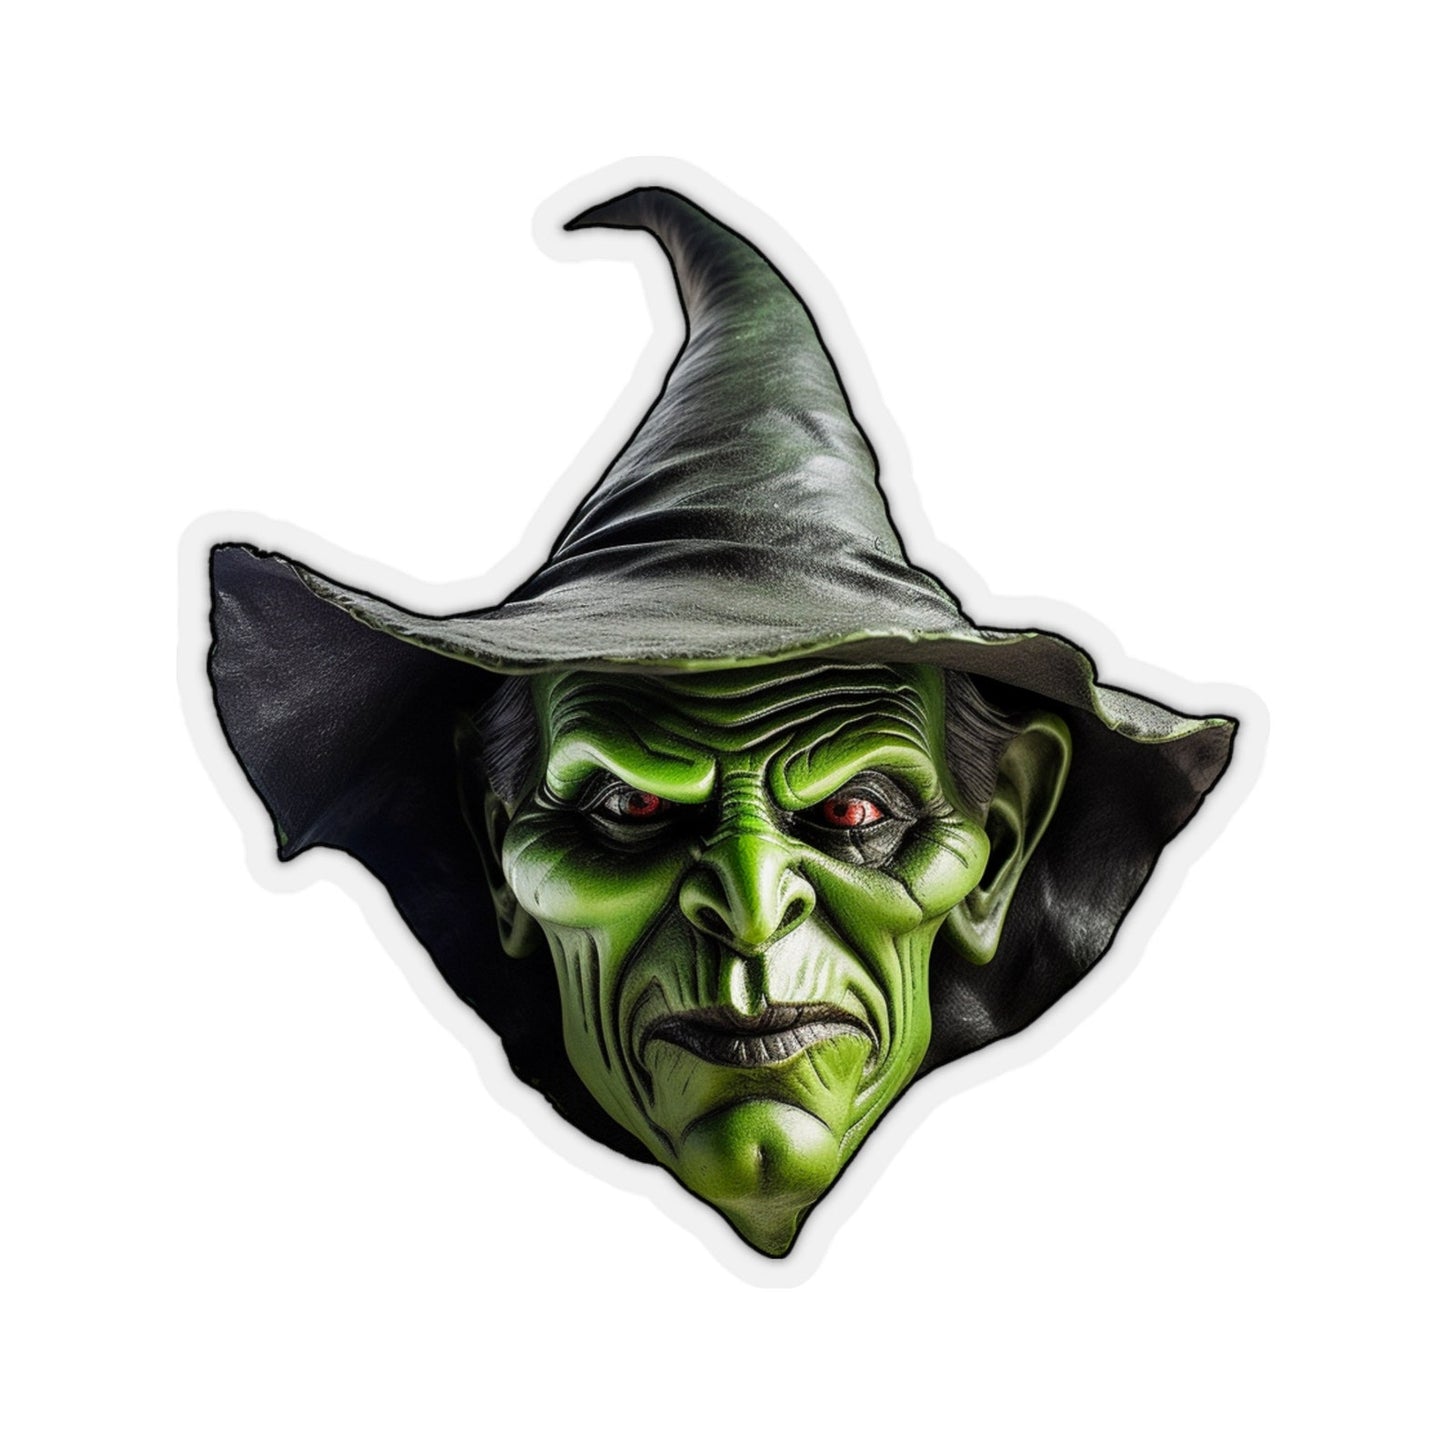 Vintage Scary Witch Mask Evil Green with Pointed Black Hat Kiss-Cut Transparent Sticker by Studio Ten Design